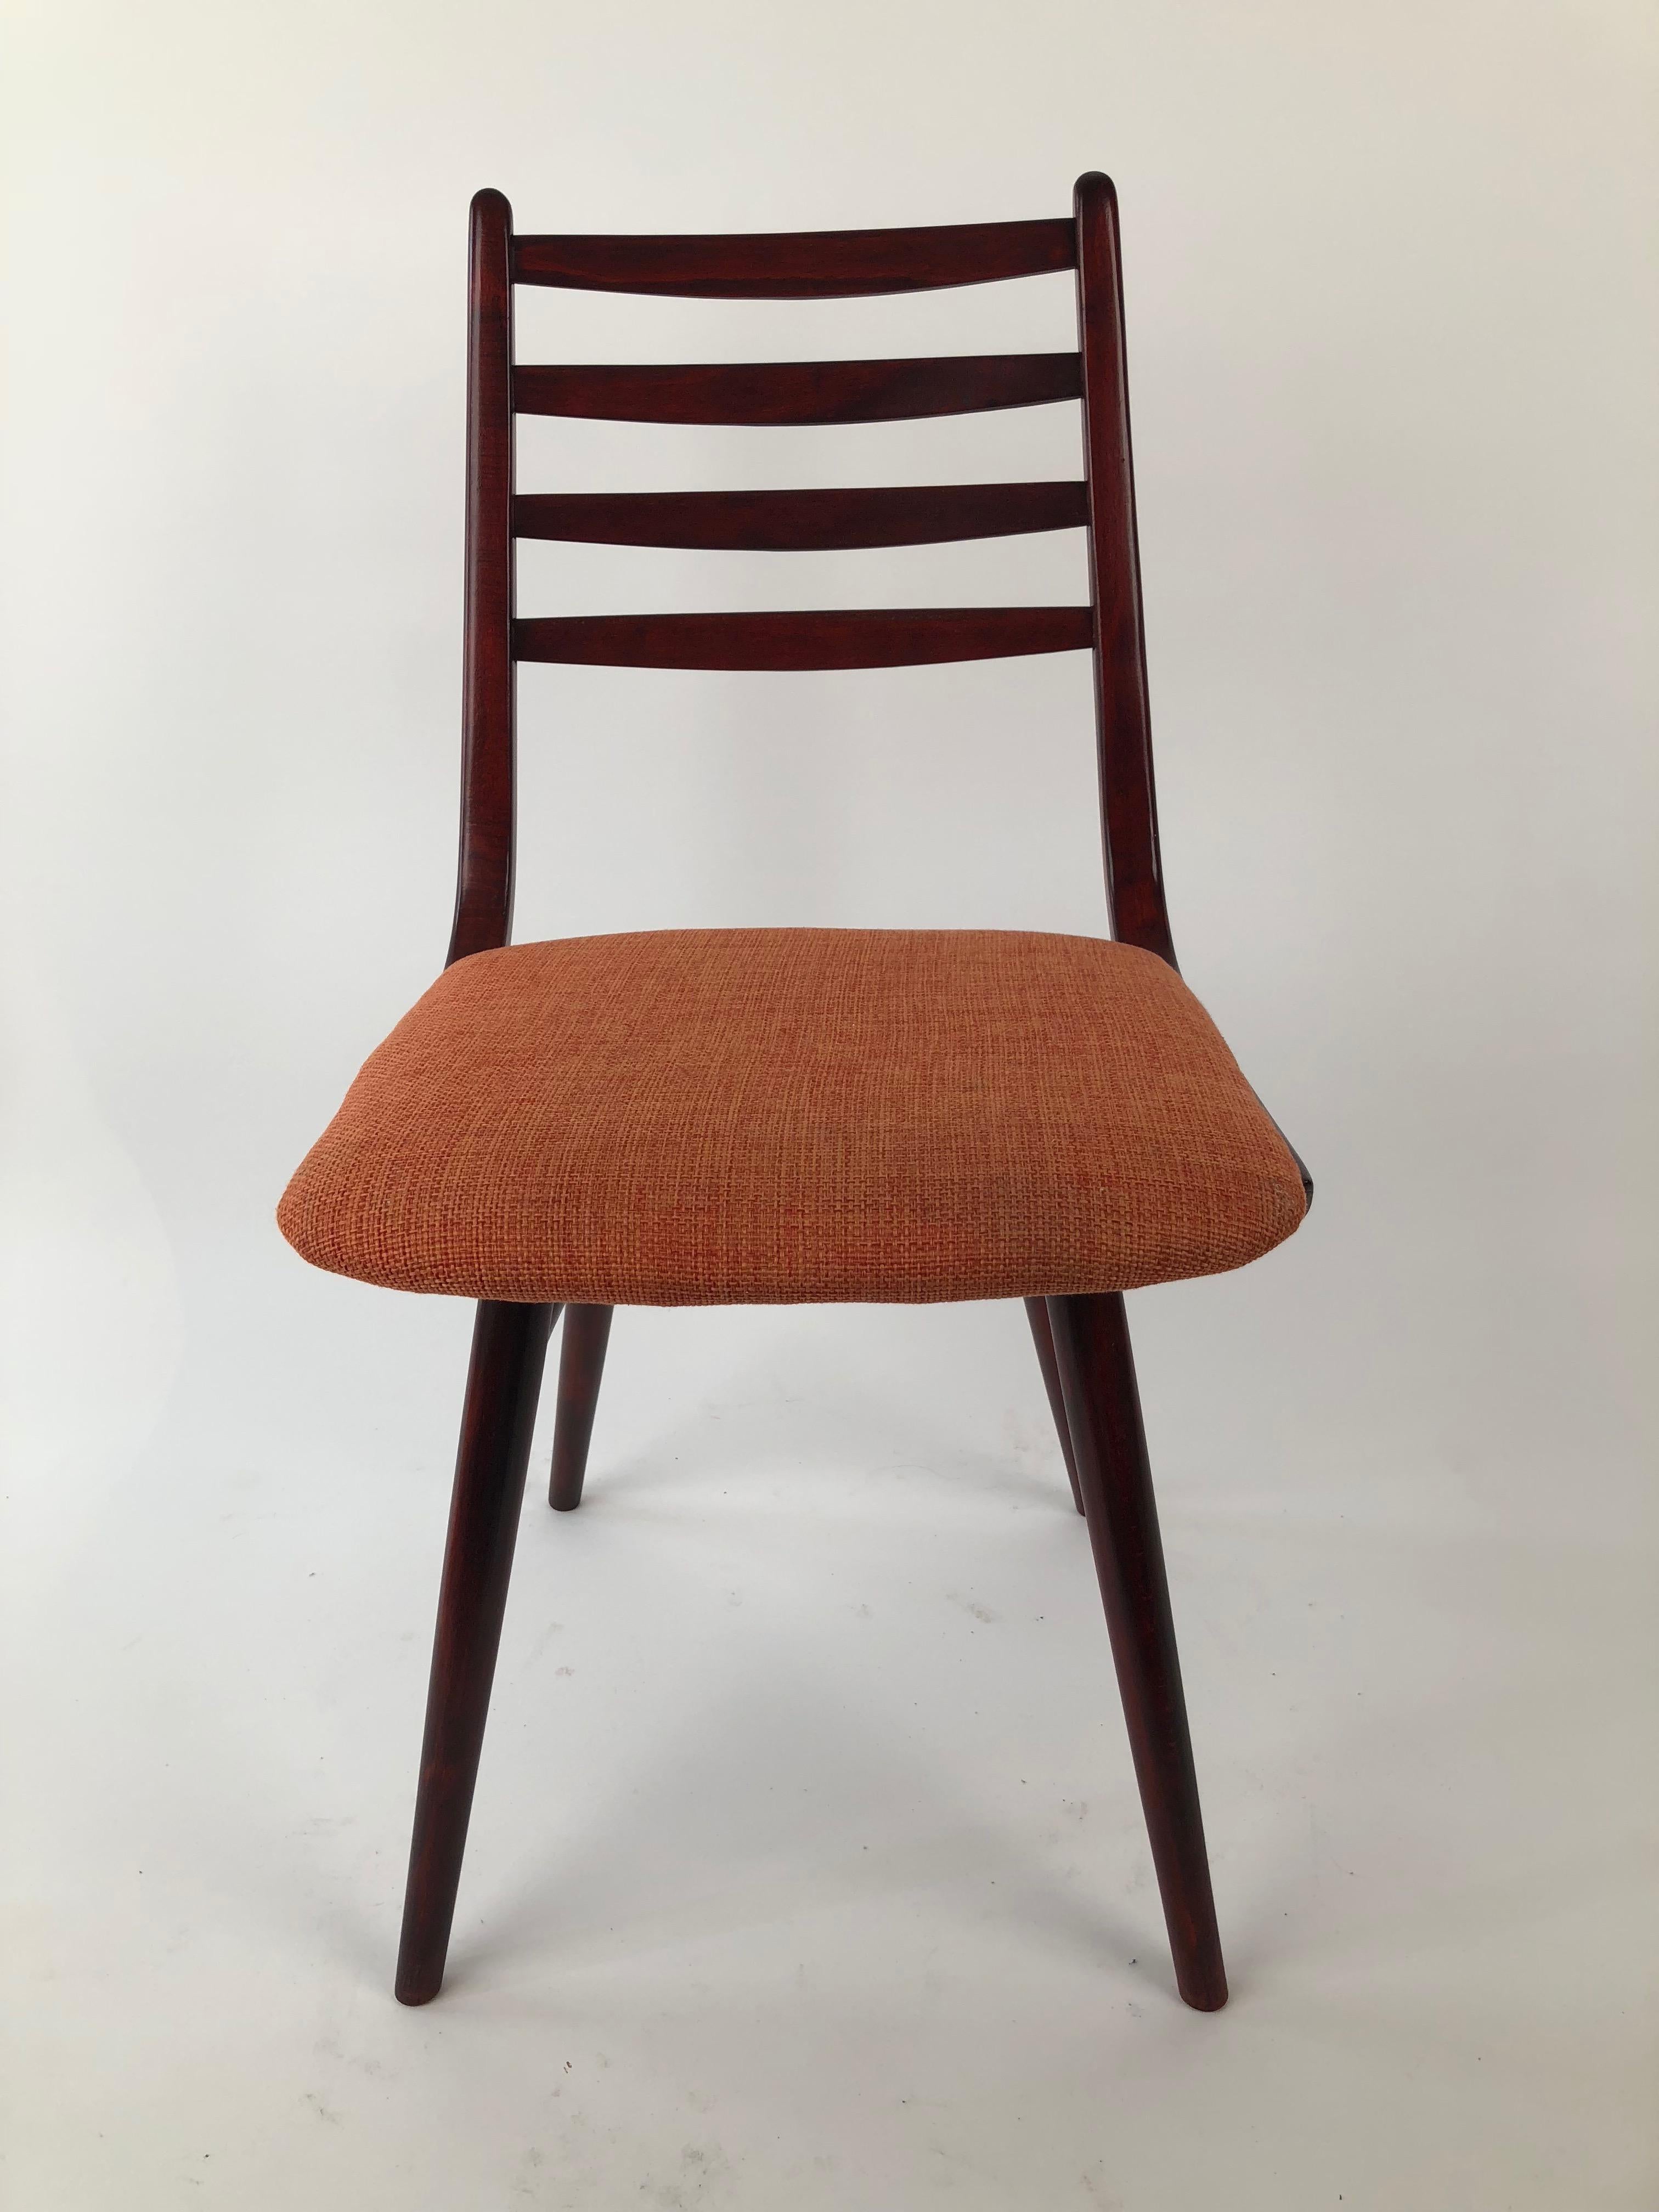 Set of 4 Dinning Chairs, 1970's, Thonet Factory For Sale 8